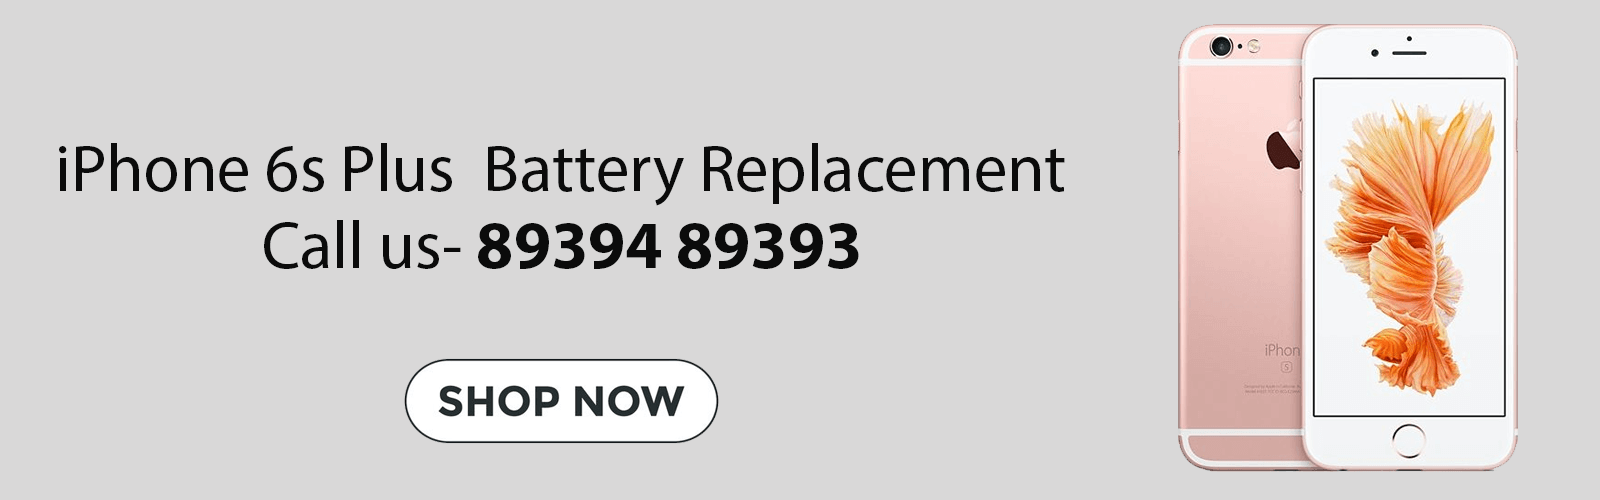 iPhone 6S Plus Battery Replacement Price Chennai